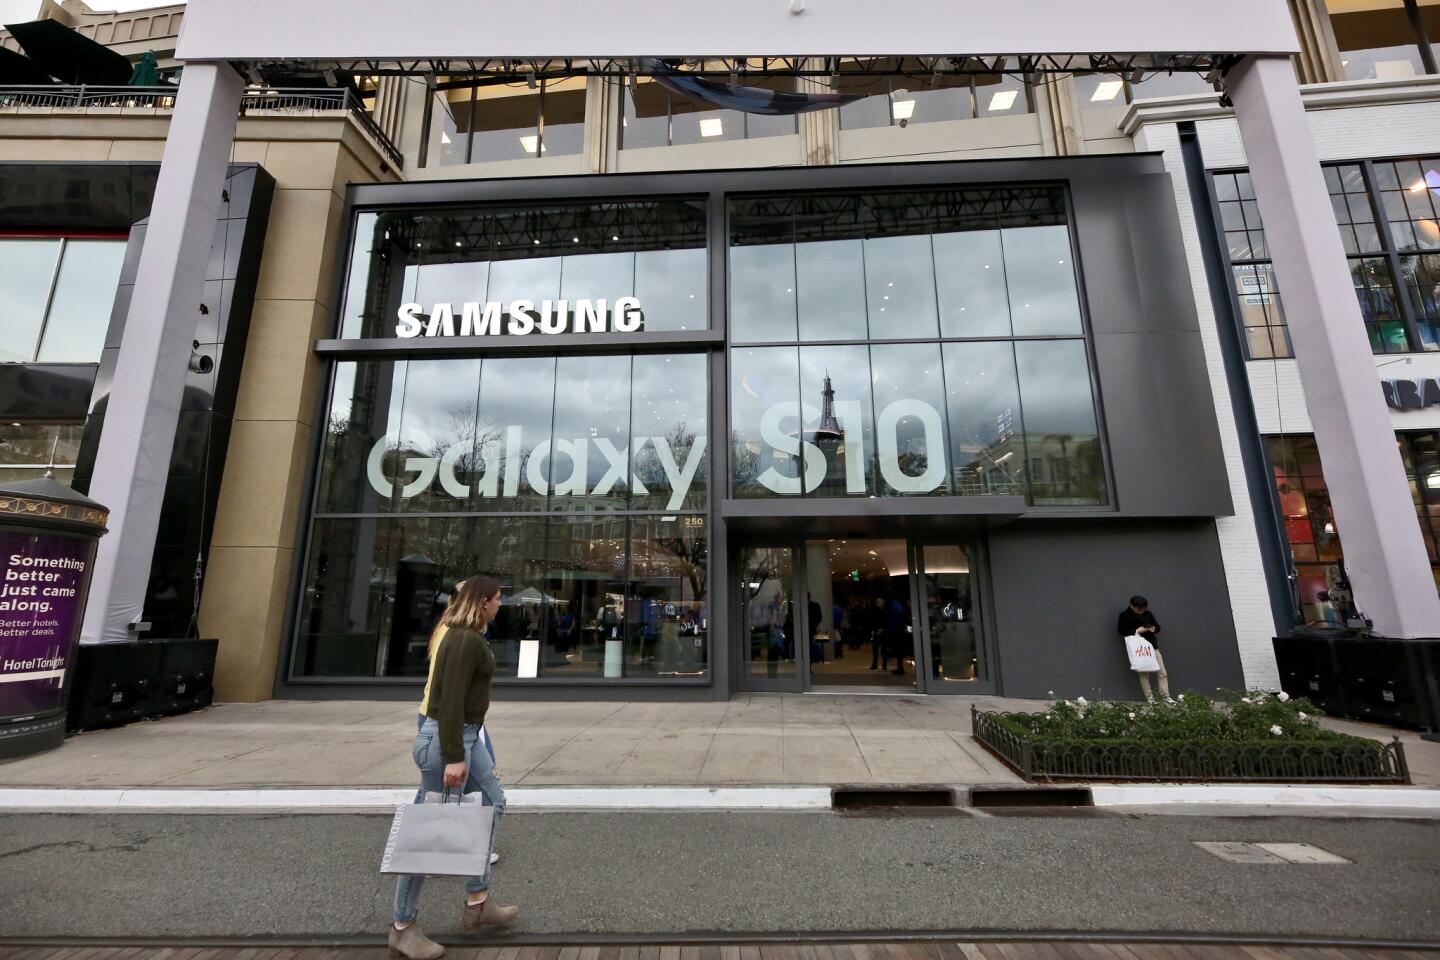 Samsung held the grand opening for the new store at the Americana at Brand in Glendale, on Wednesday, Feb. 20, 2019.